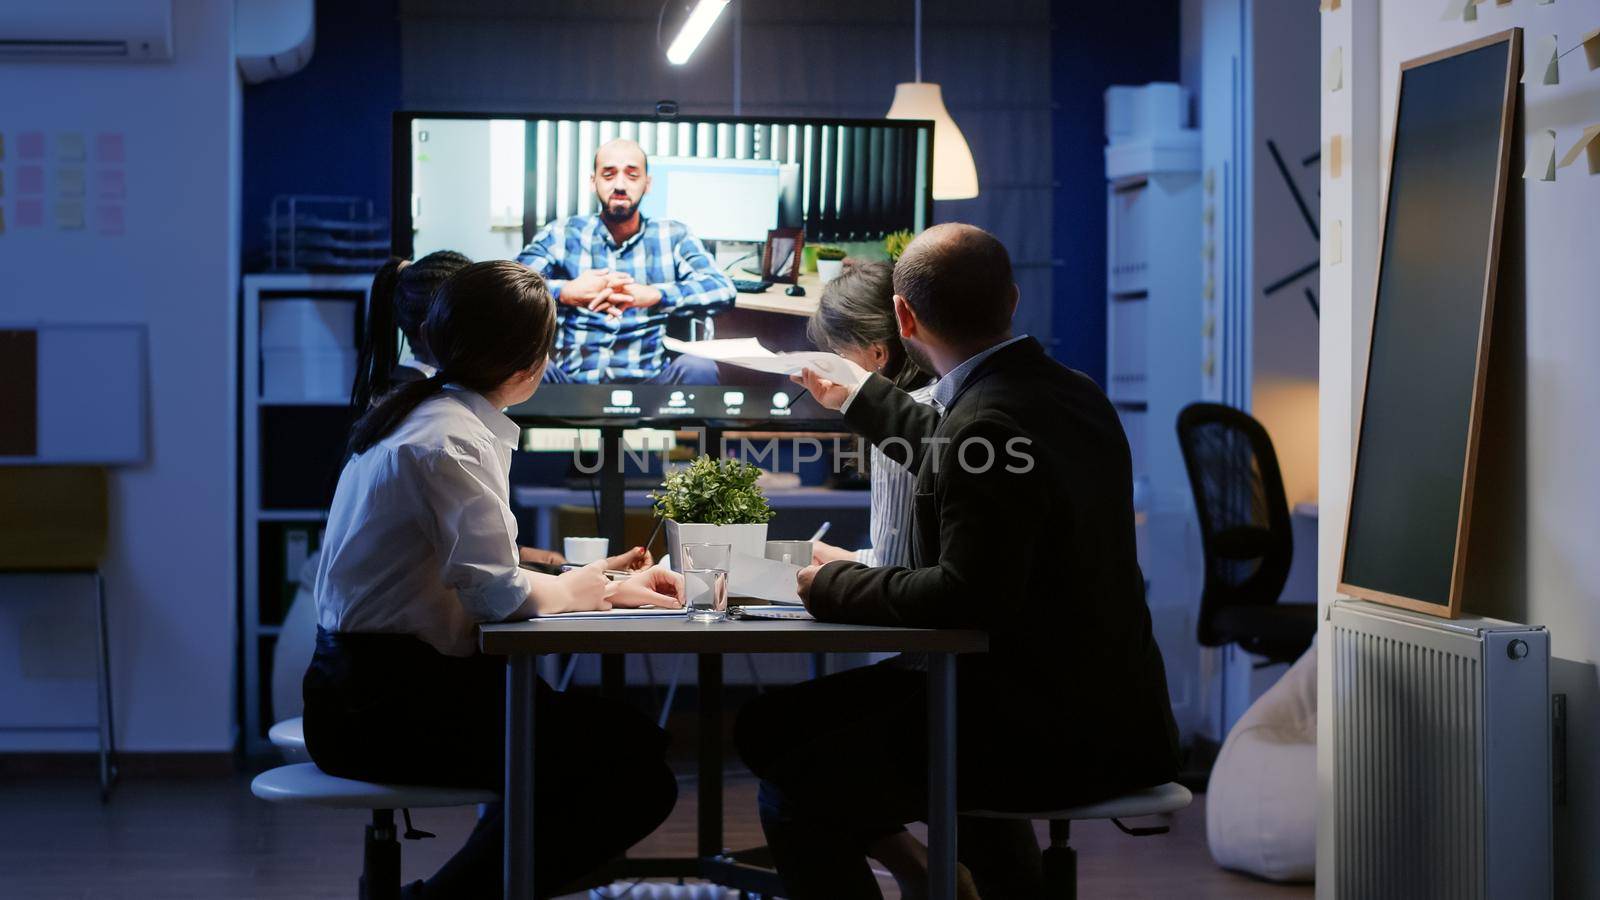 Multi ethnic businesspeople discussing with remote entrepreneur in wheelchair during online videocall conference at night in company meeting office room. Diverse focused teamwork brainstorming ideas